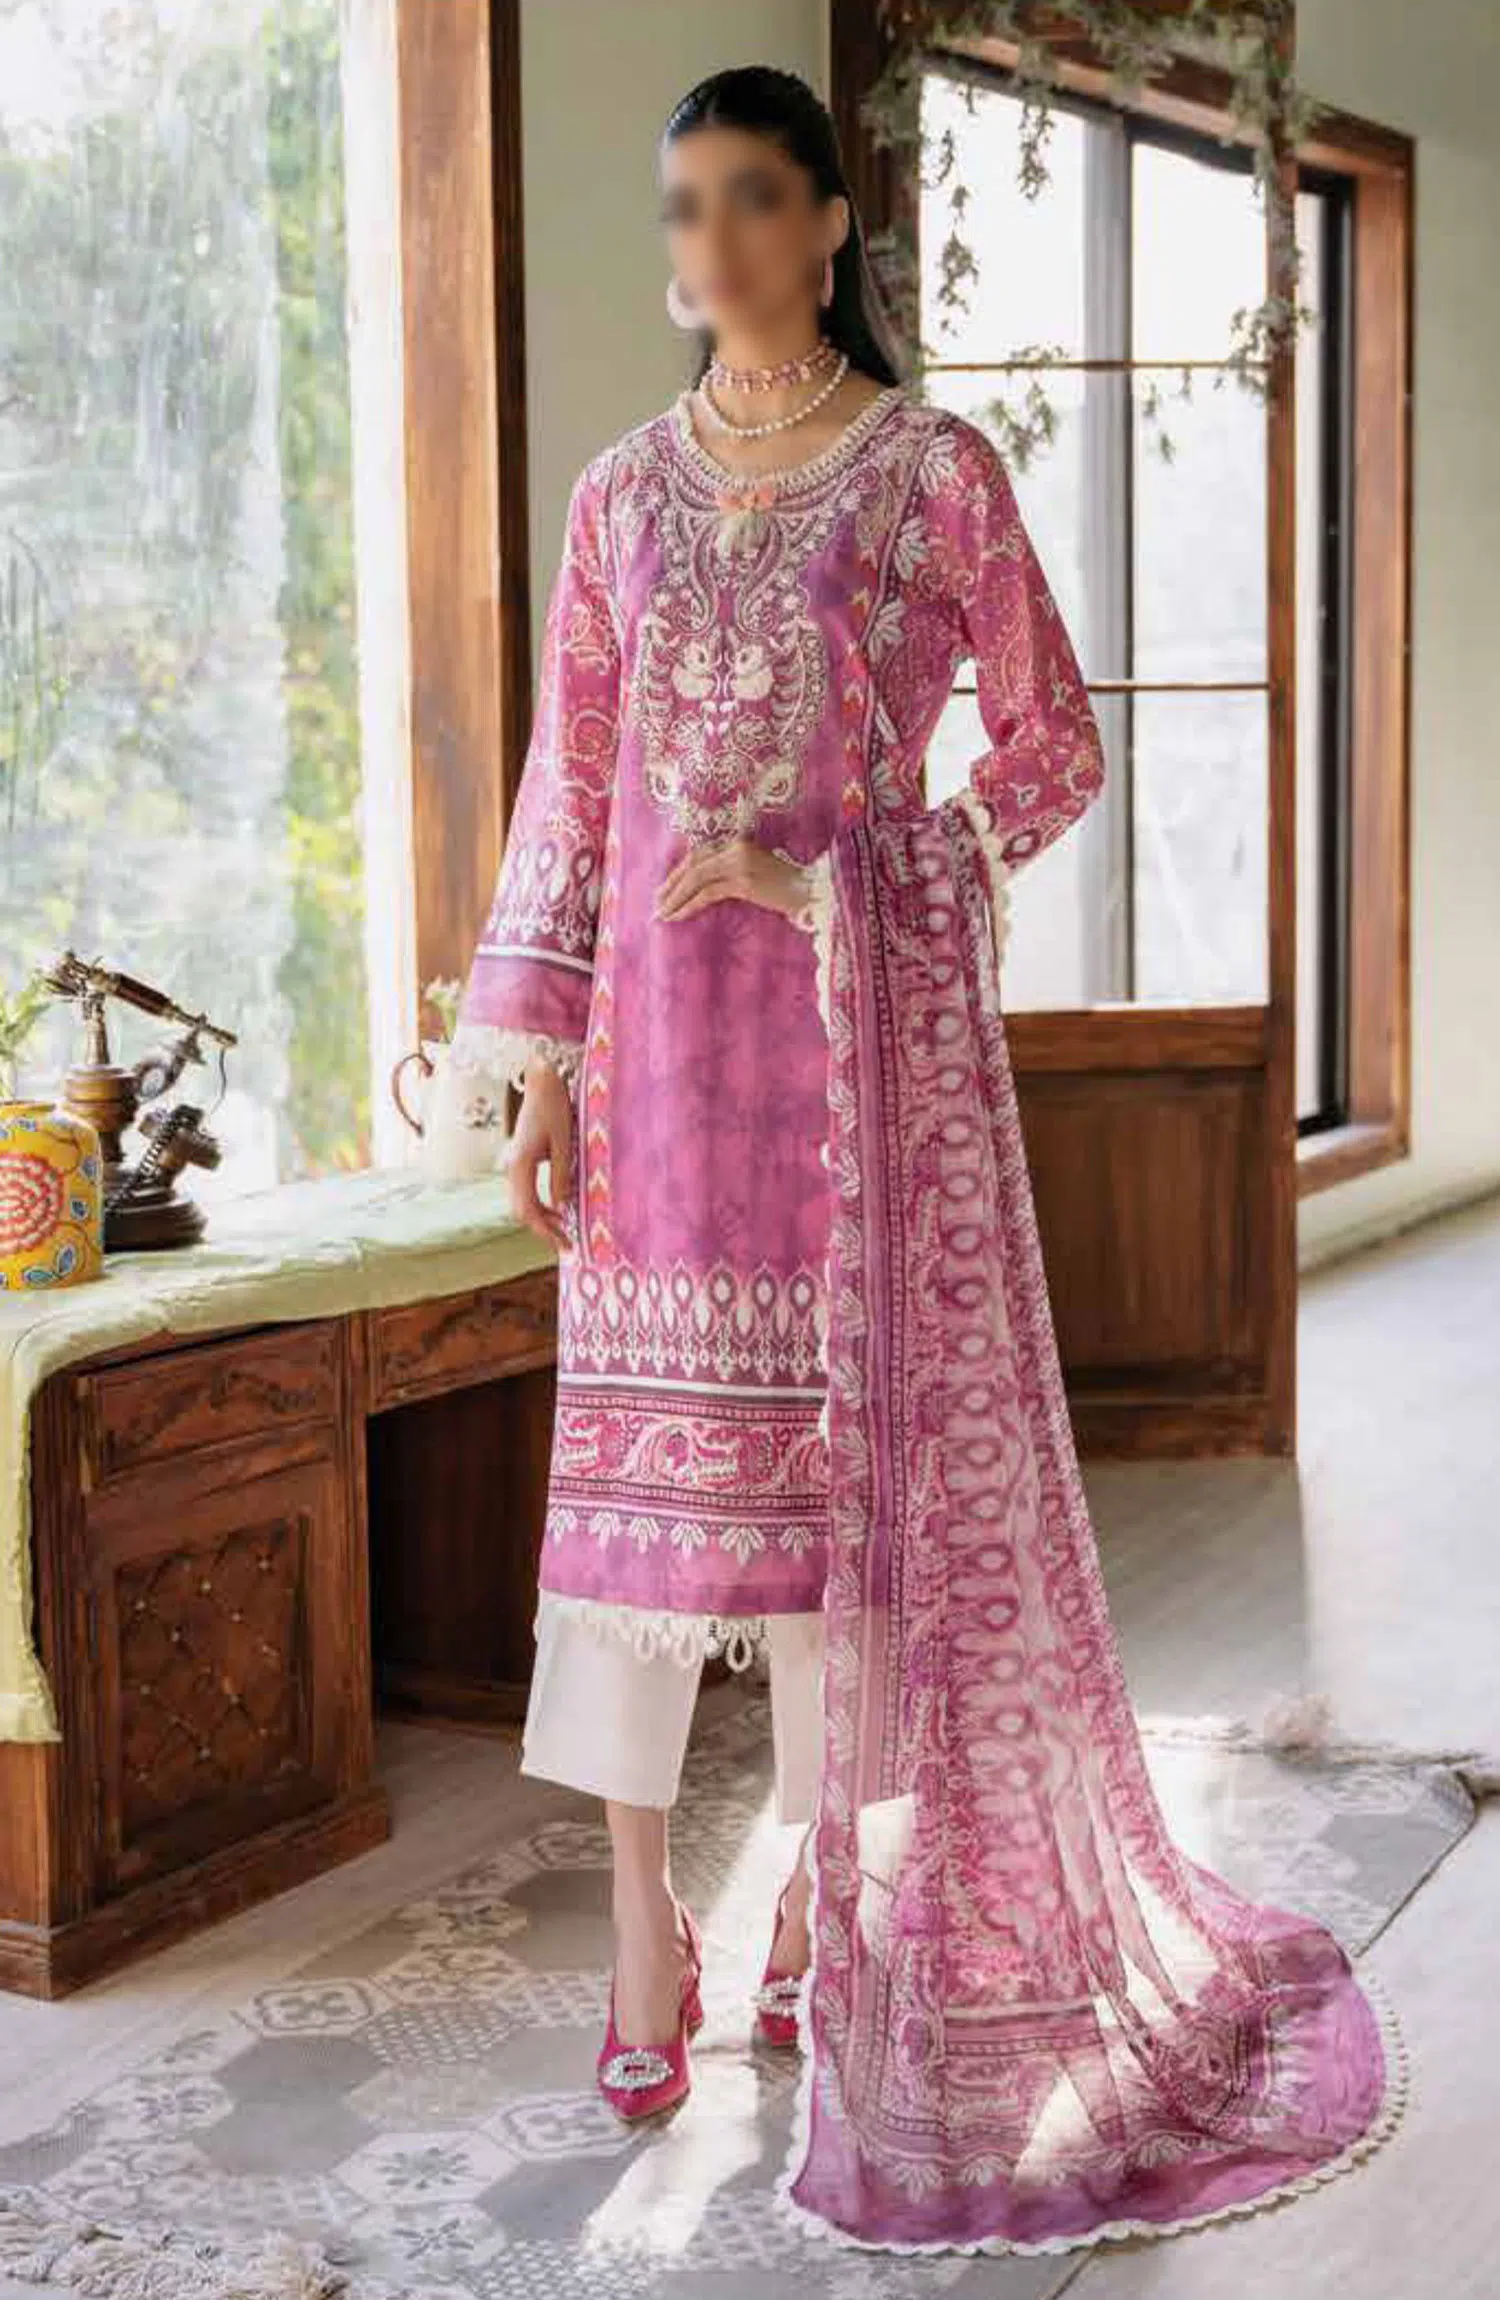 Roheenaz Flora Unstitched Printed Lawn Collection - RNP-02A AMARANTH